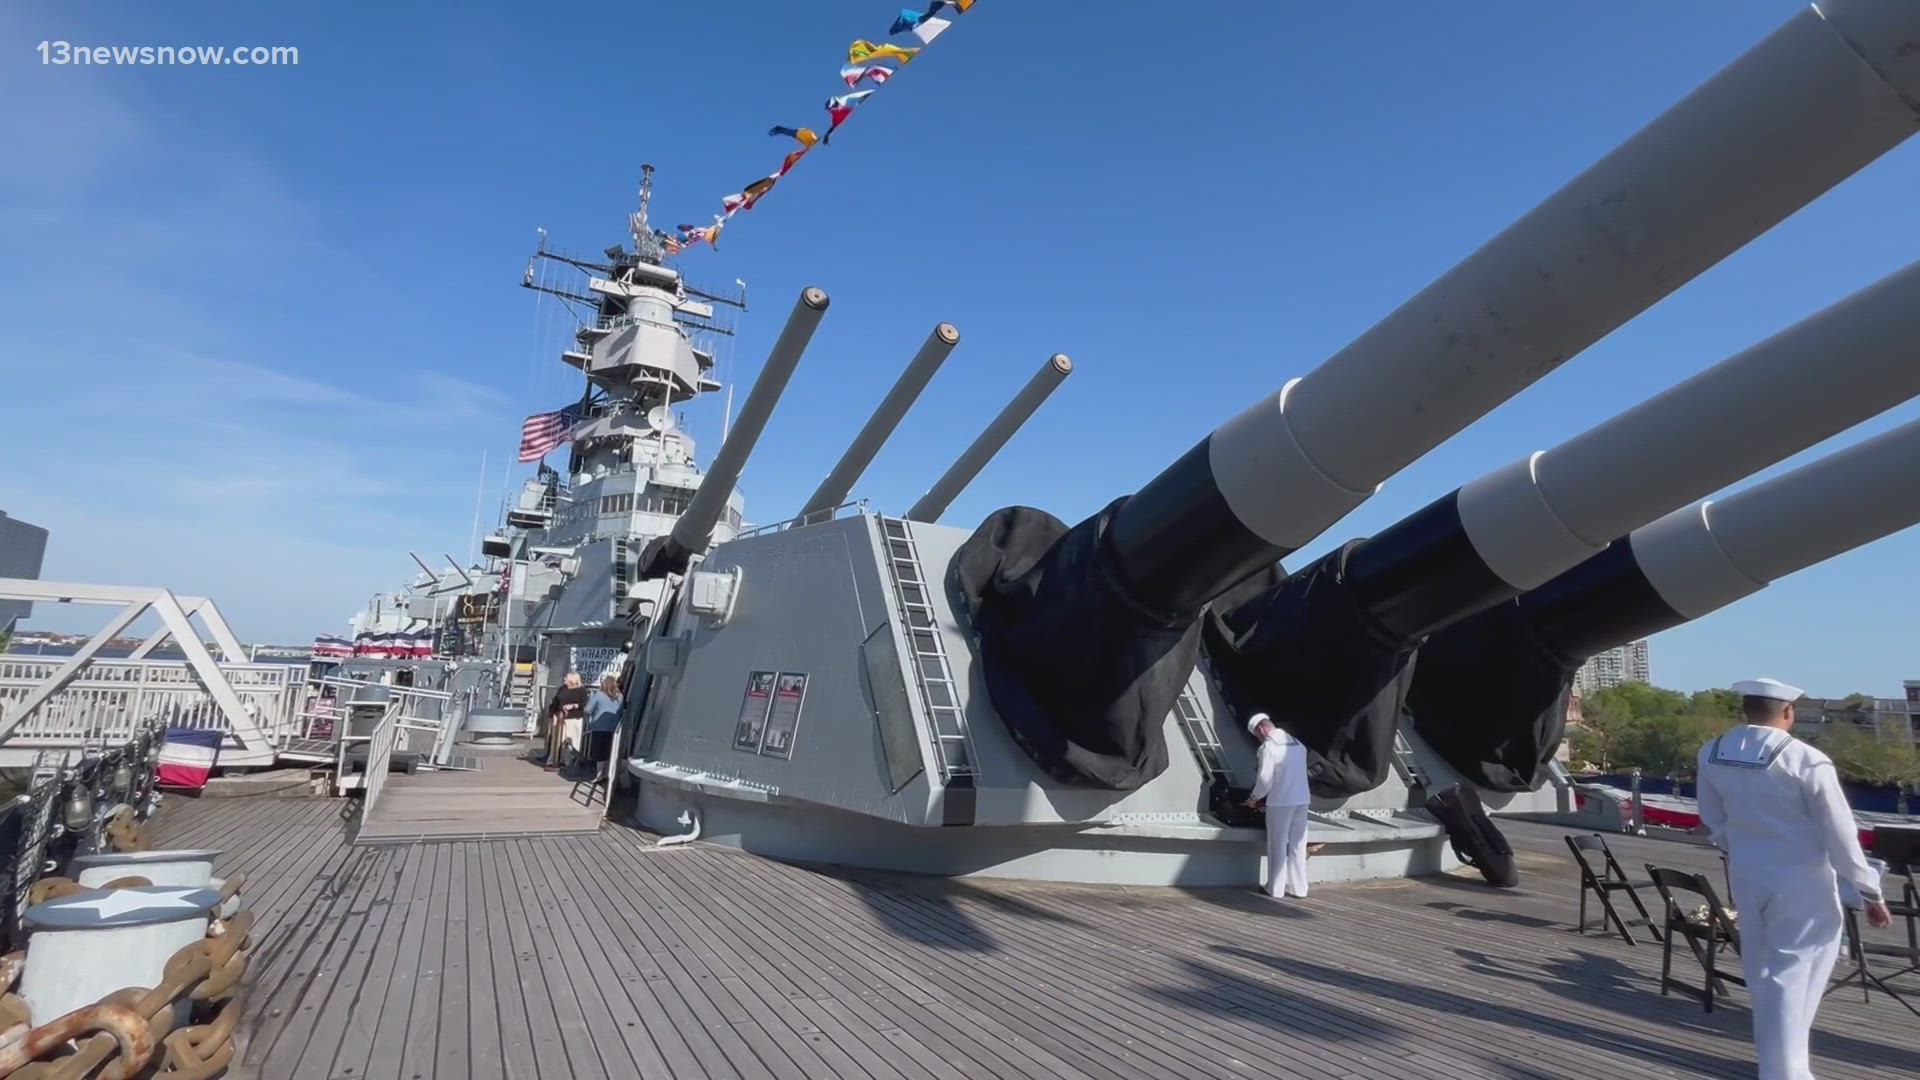 Tuesday marked 80 years since the USS Wisconsin, one of the largest and last battleships built by the U.S. Navy, was commissioned.